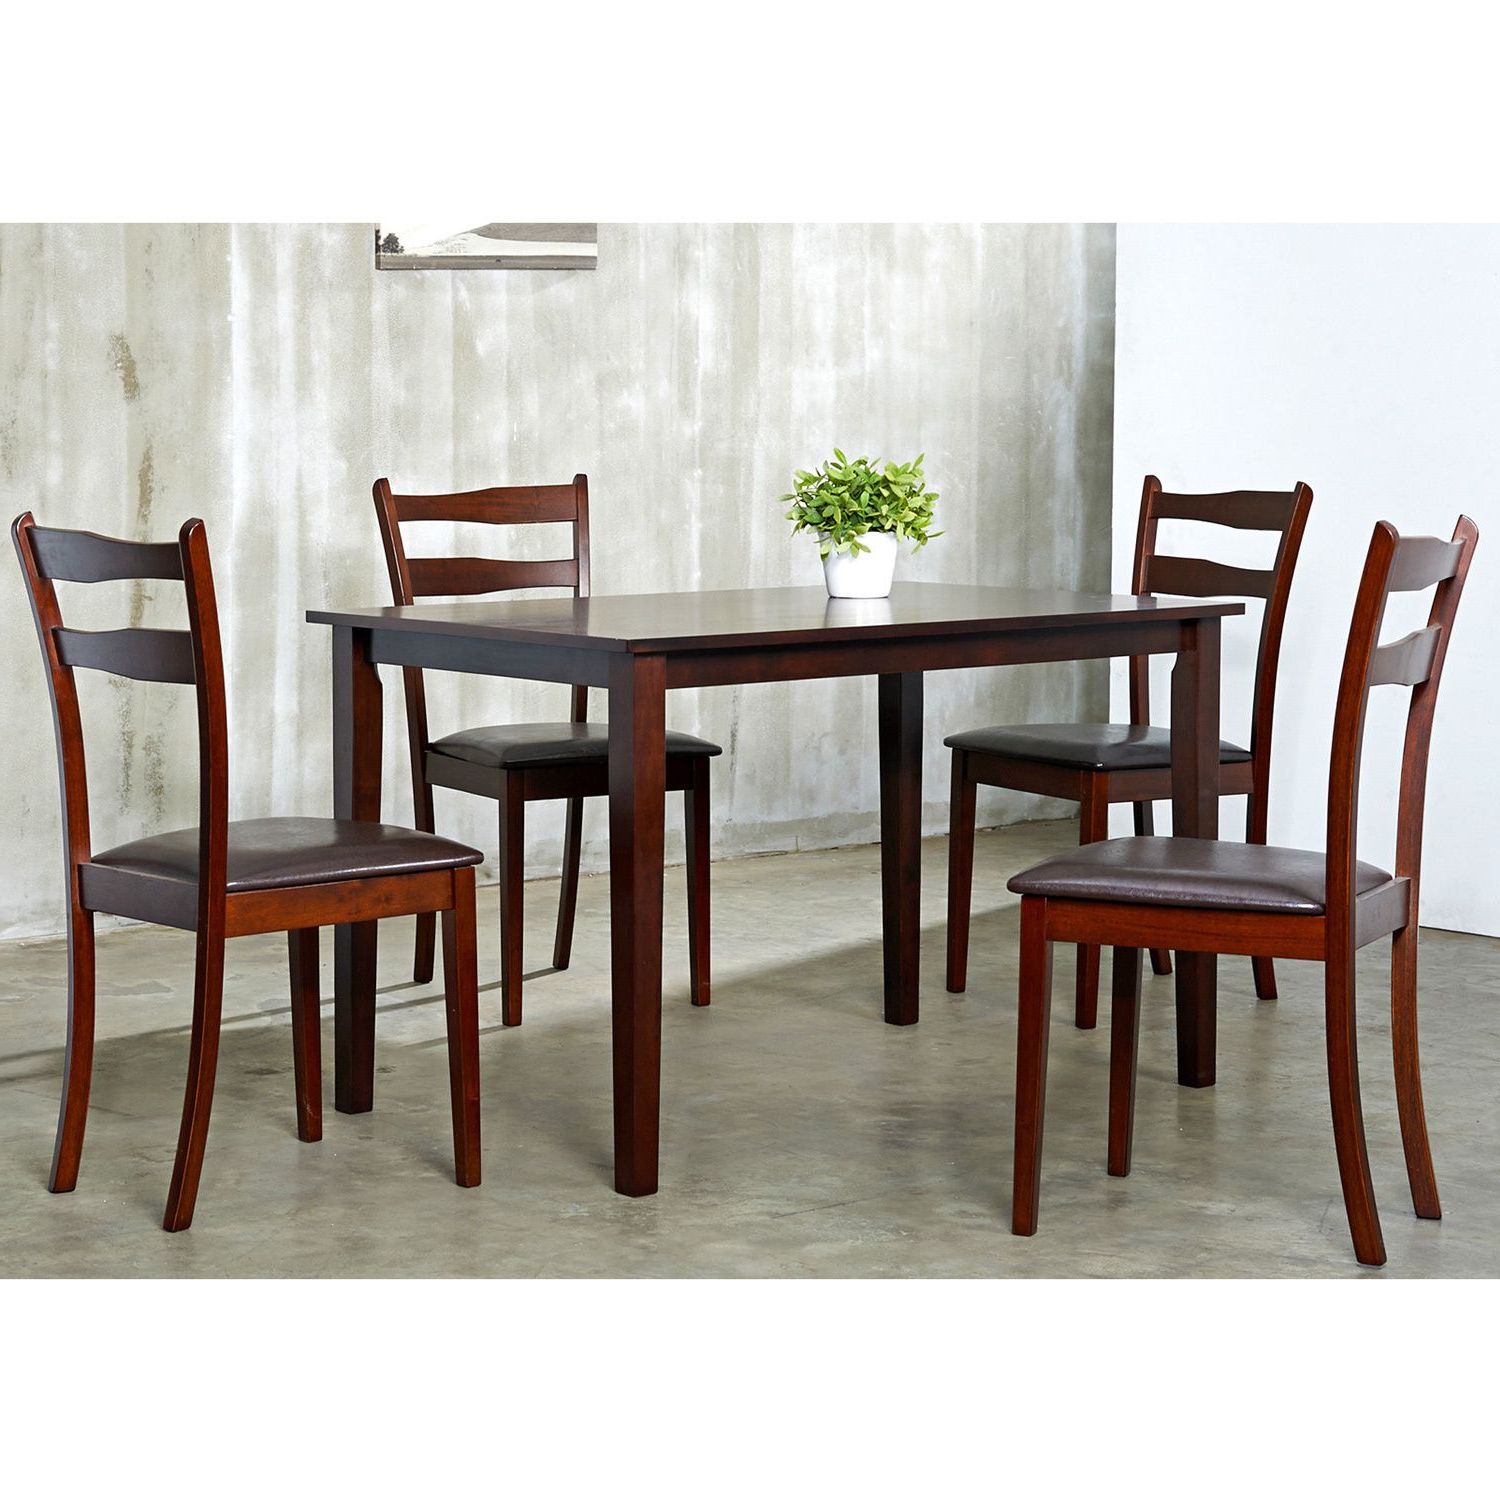 Stylish And Beautiful, These Convenient Dining Room Furniture Sets Inside Well Known Baxton Studio Keitaro 5 Piece Dining Sets (View 3 of 20)